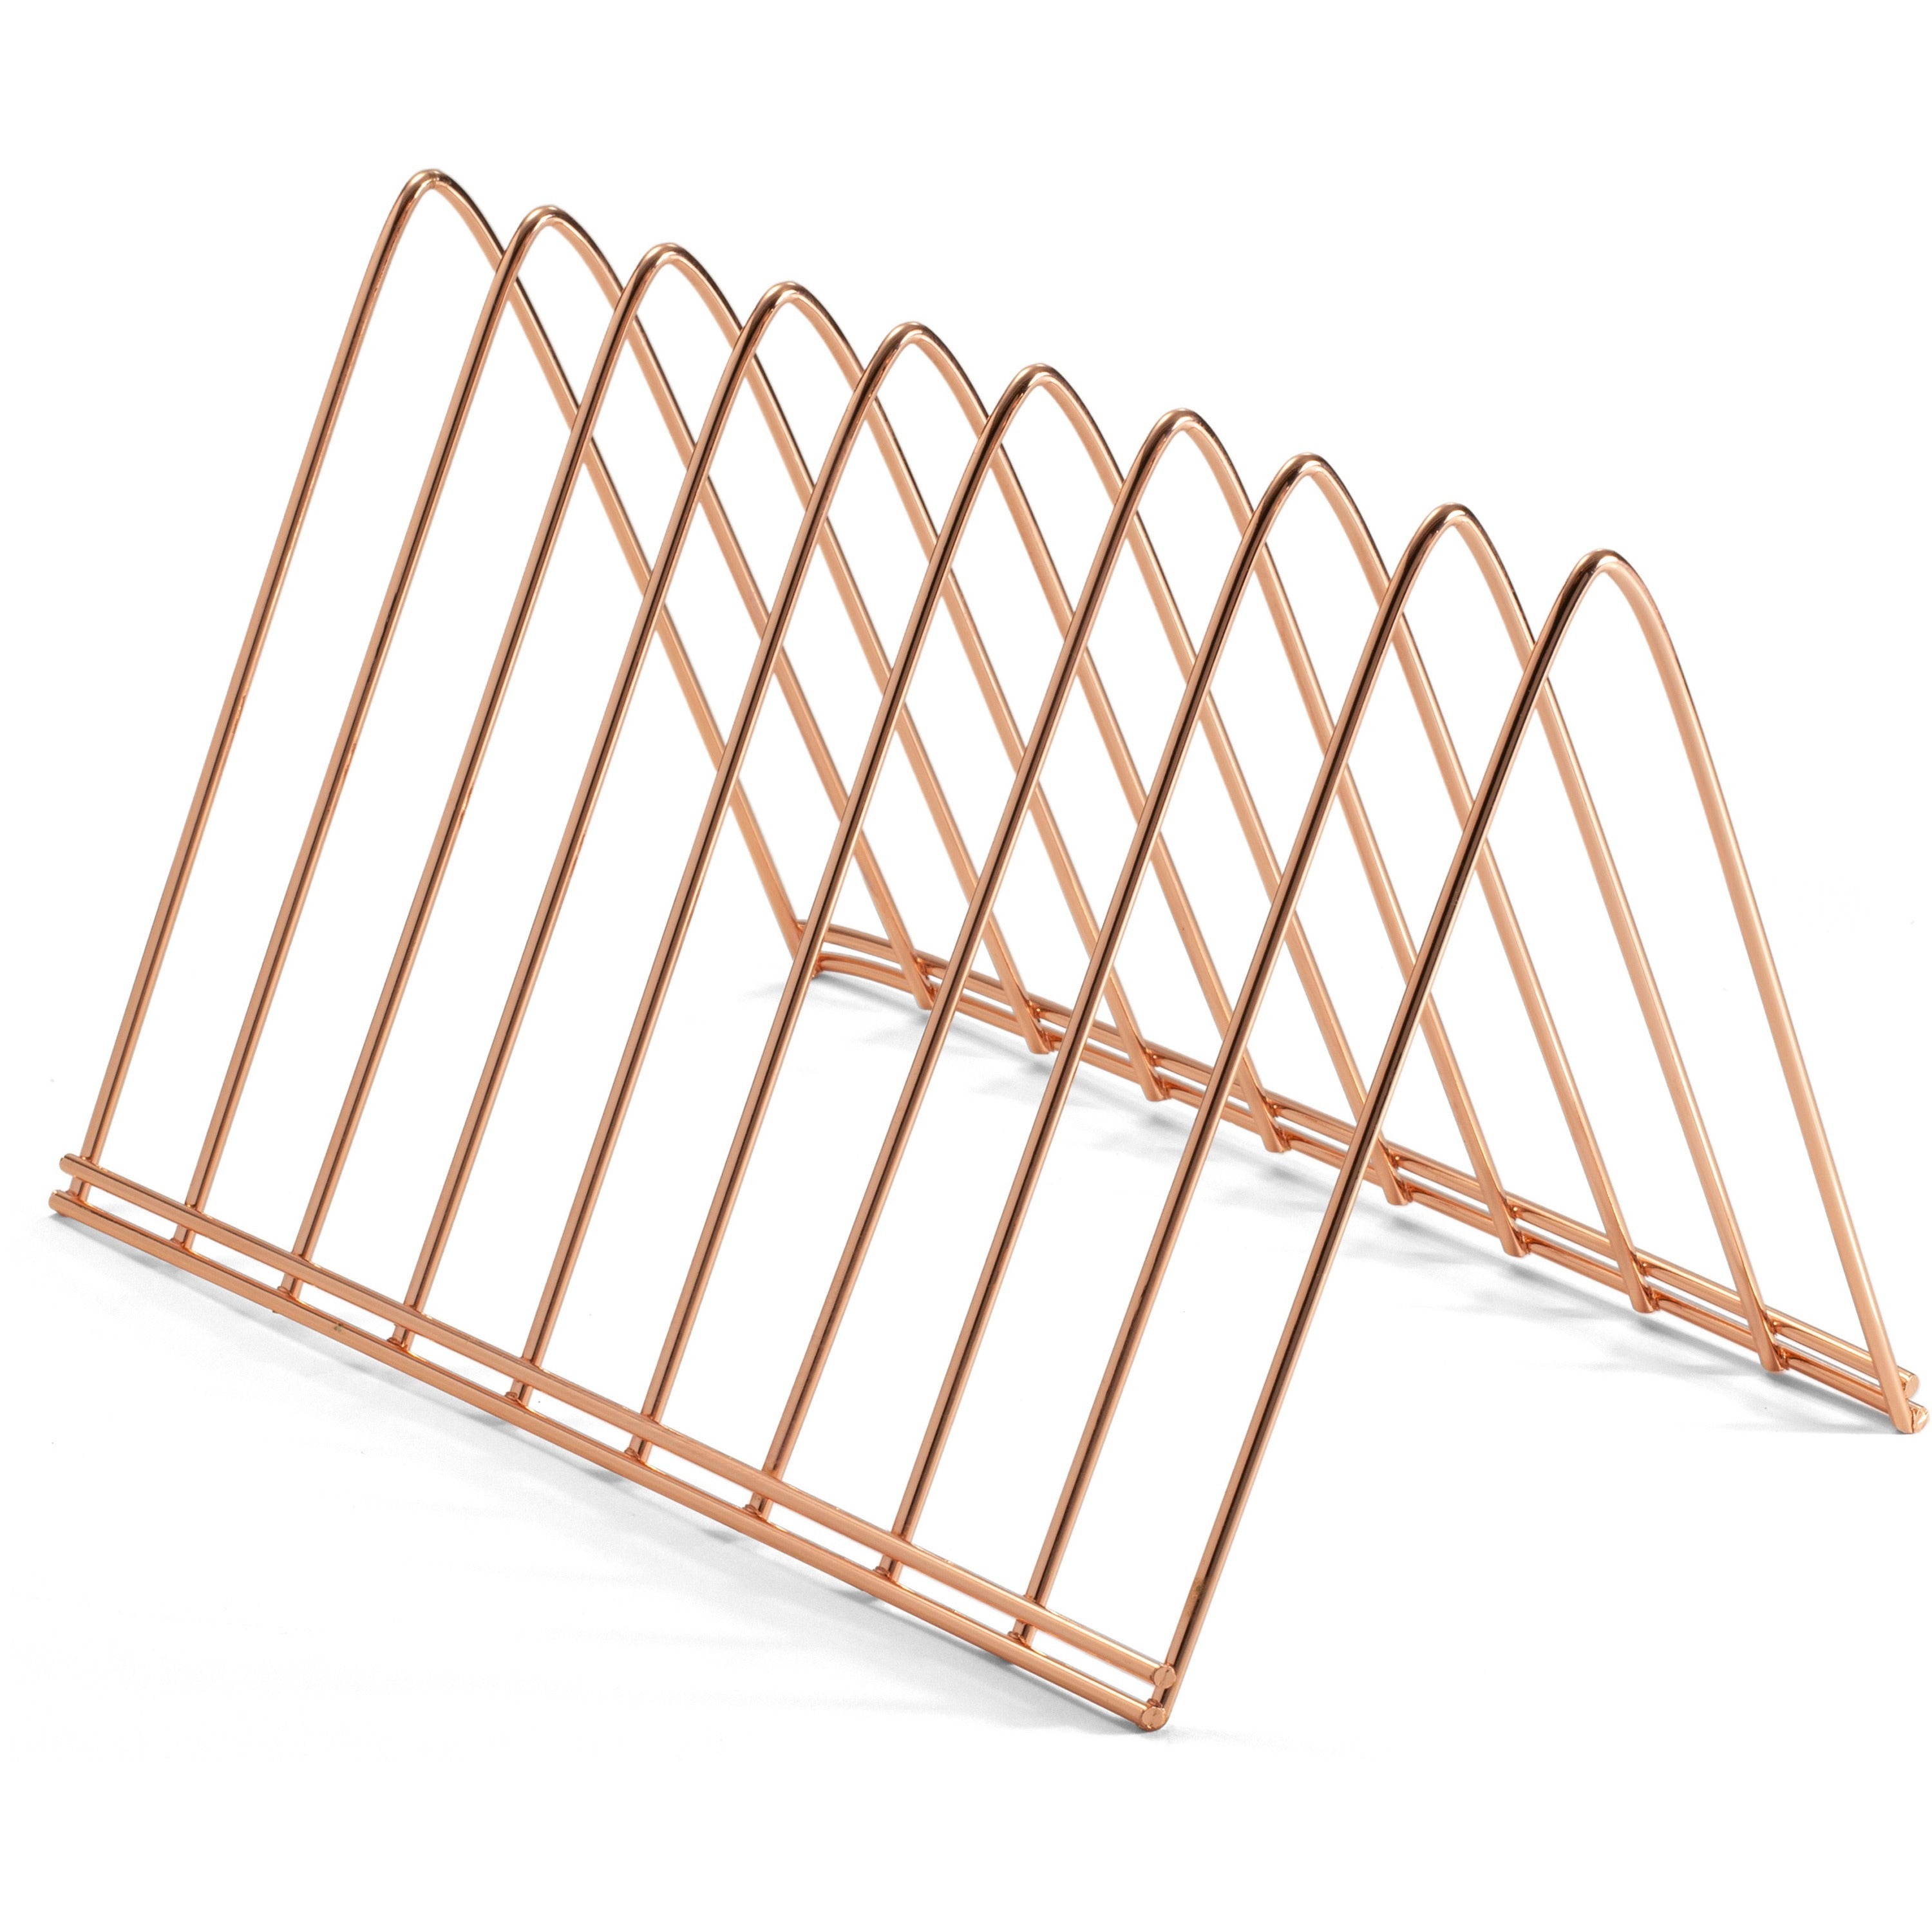 officemate-triangle-wire-sorter-7-height-x-7-width-x-11-depthdesktop-sturdy-rose-gold-steel-wire-1-each_oic93151 - 1